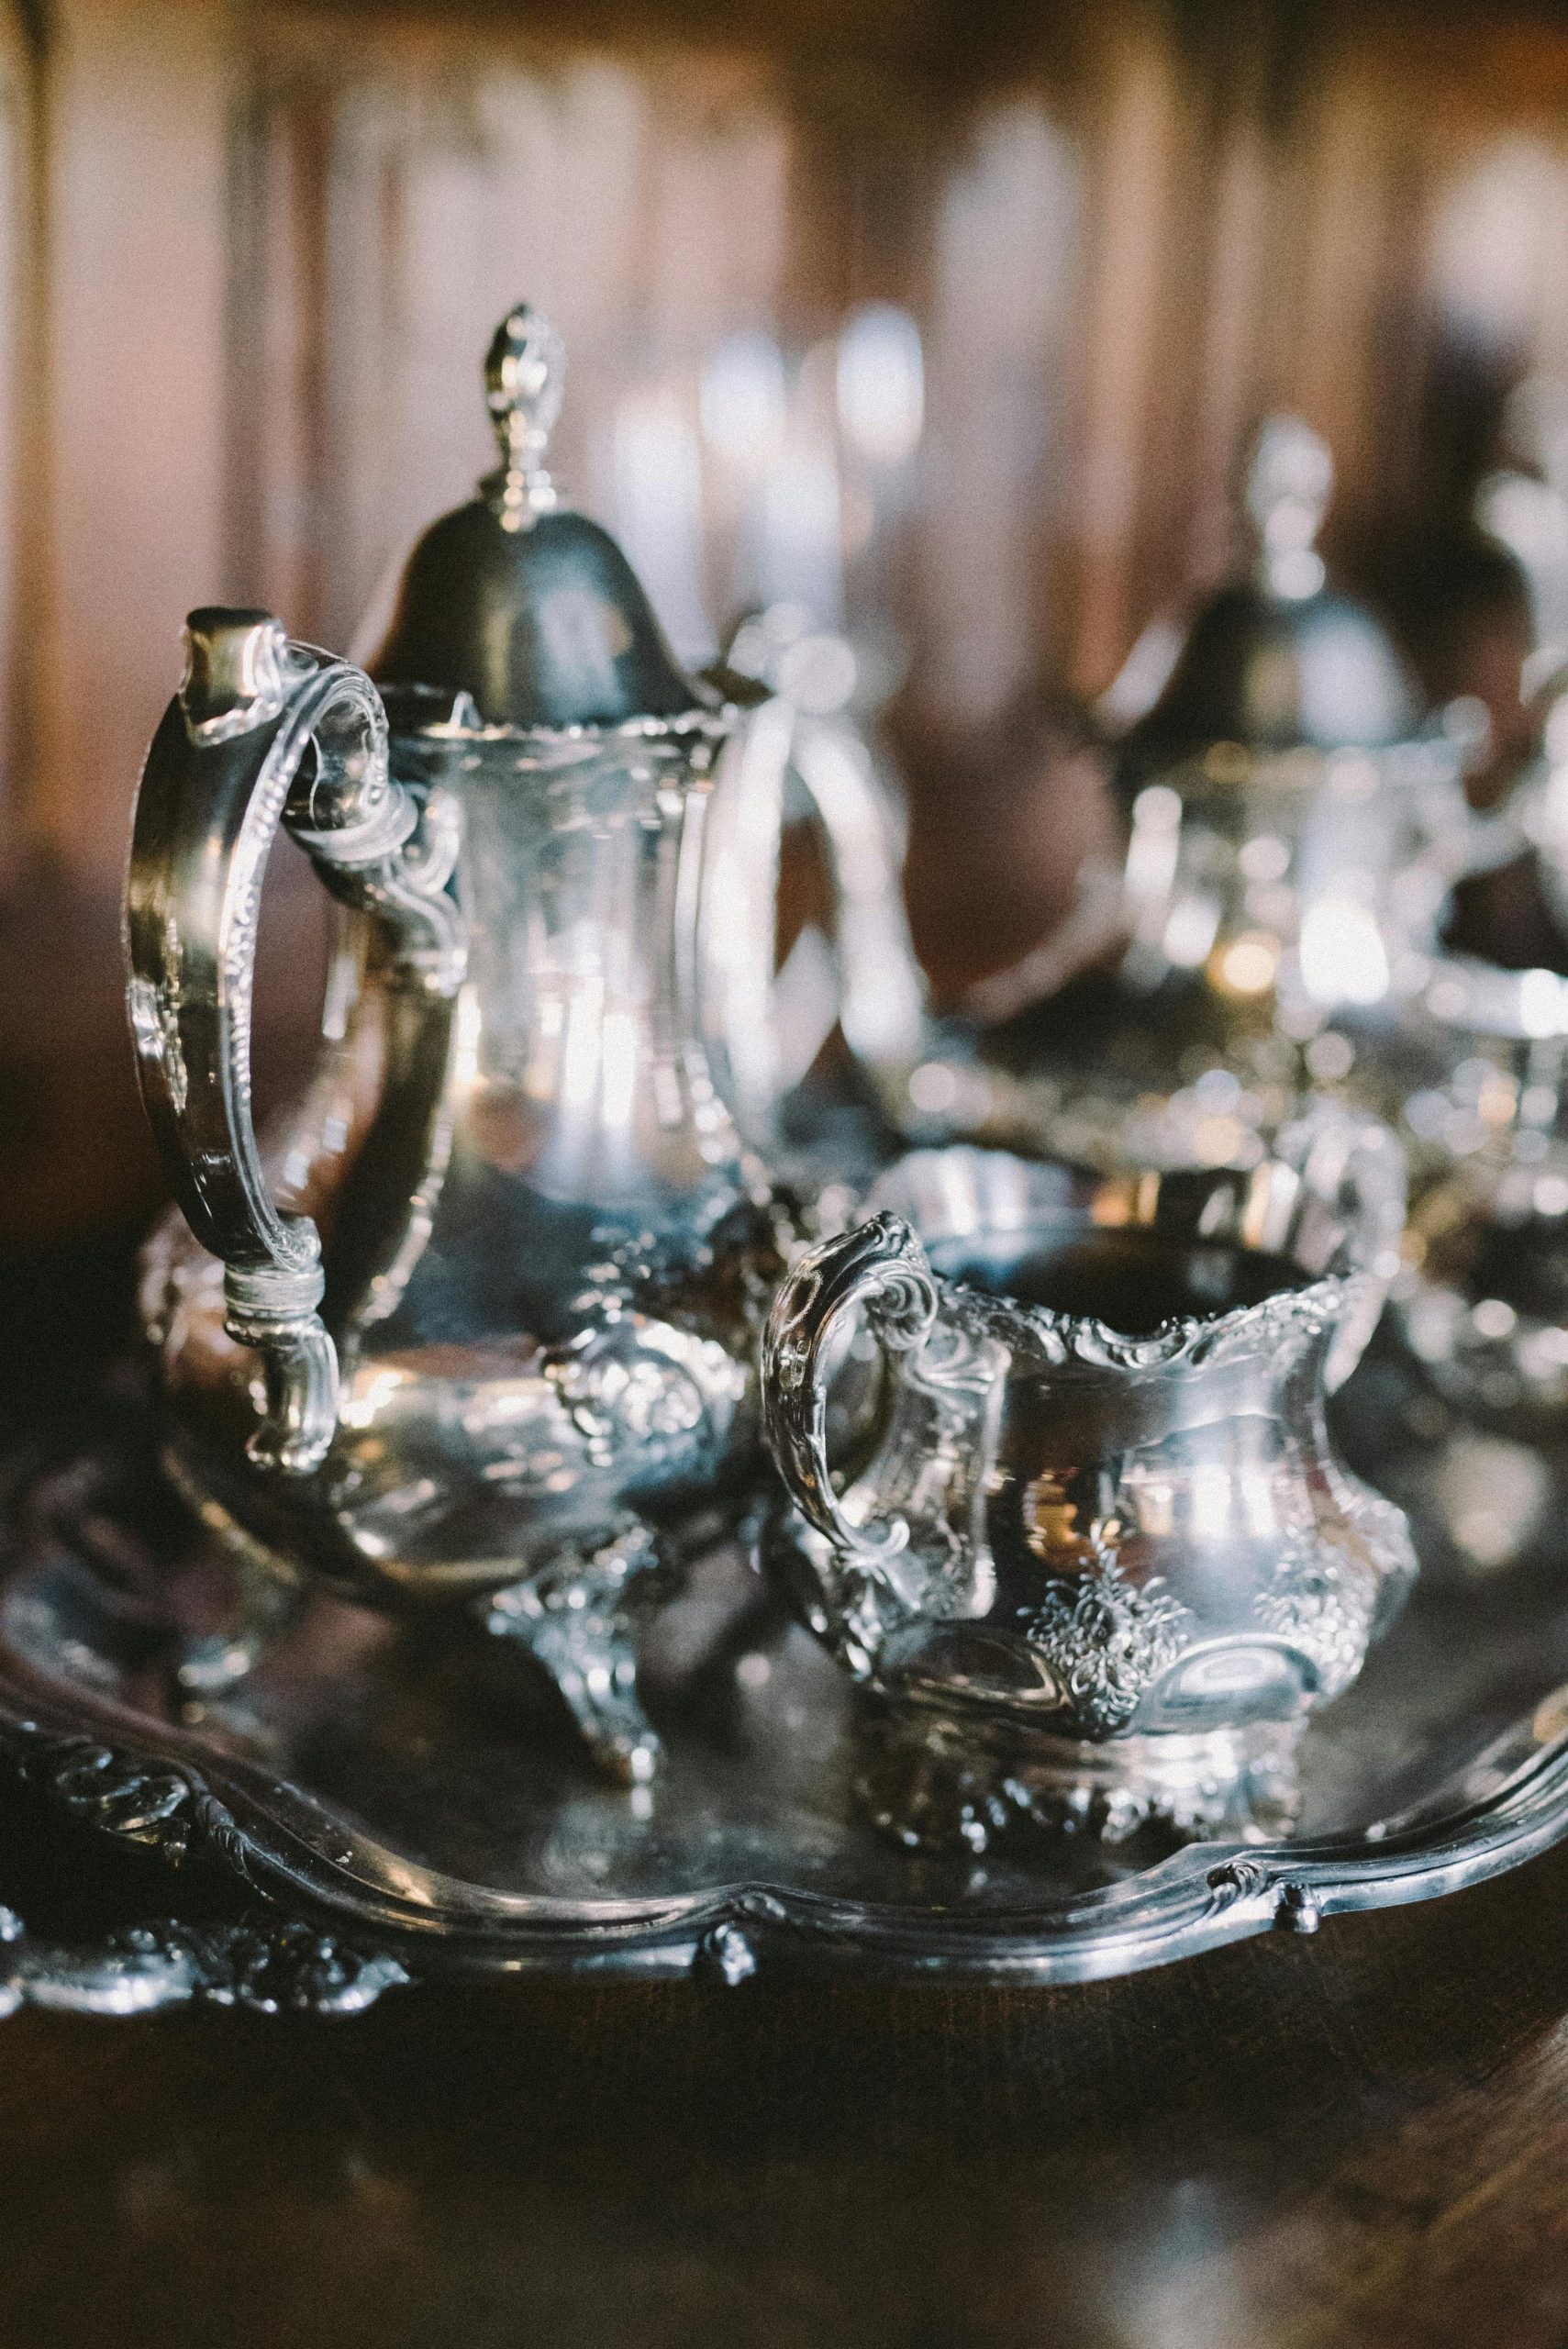 Sorry, Mom: None of Us Want the Antique Silver Flatware